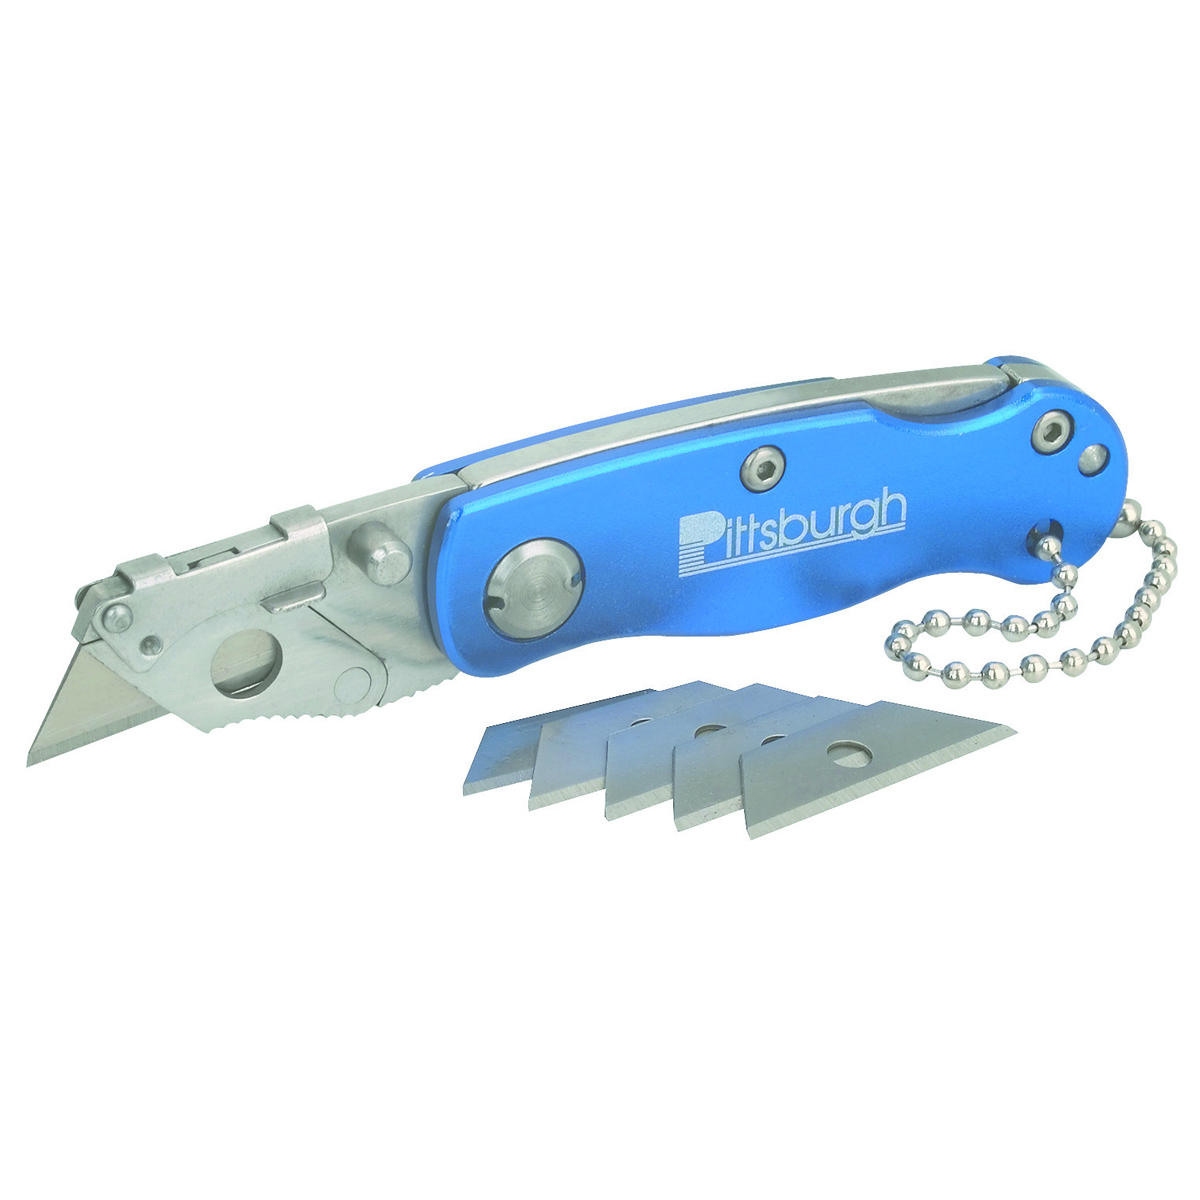 PITTSBURGH Mini Folding Lock-Back Utility Knife with Five Blades - Item 93439 / 92833 / 92845